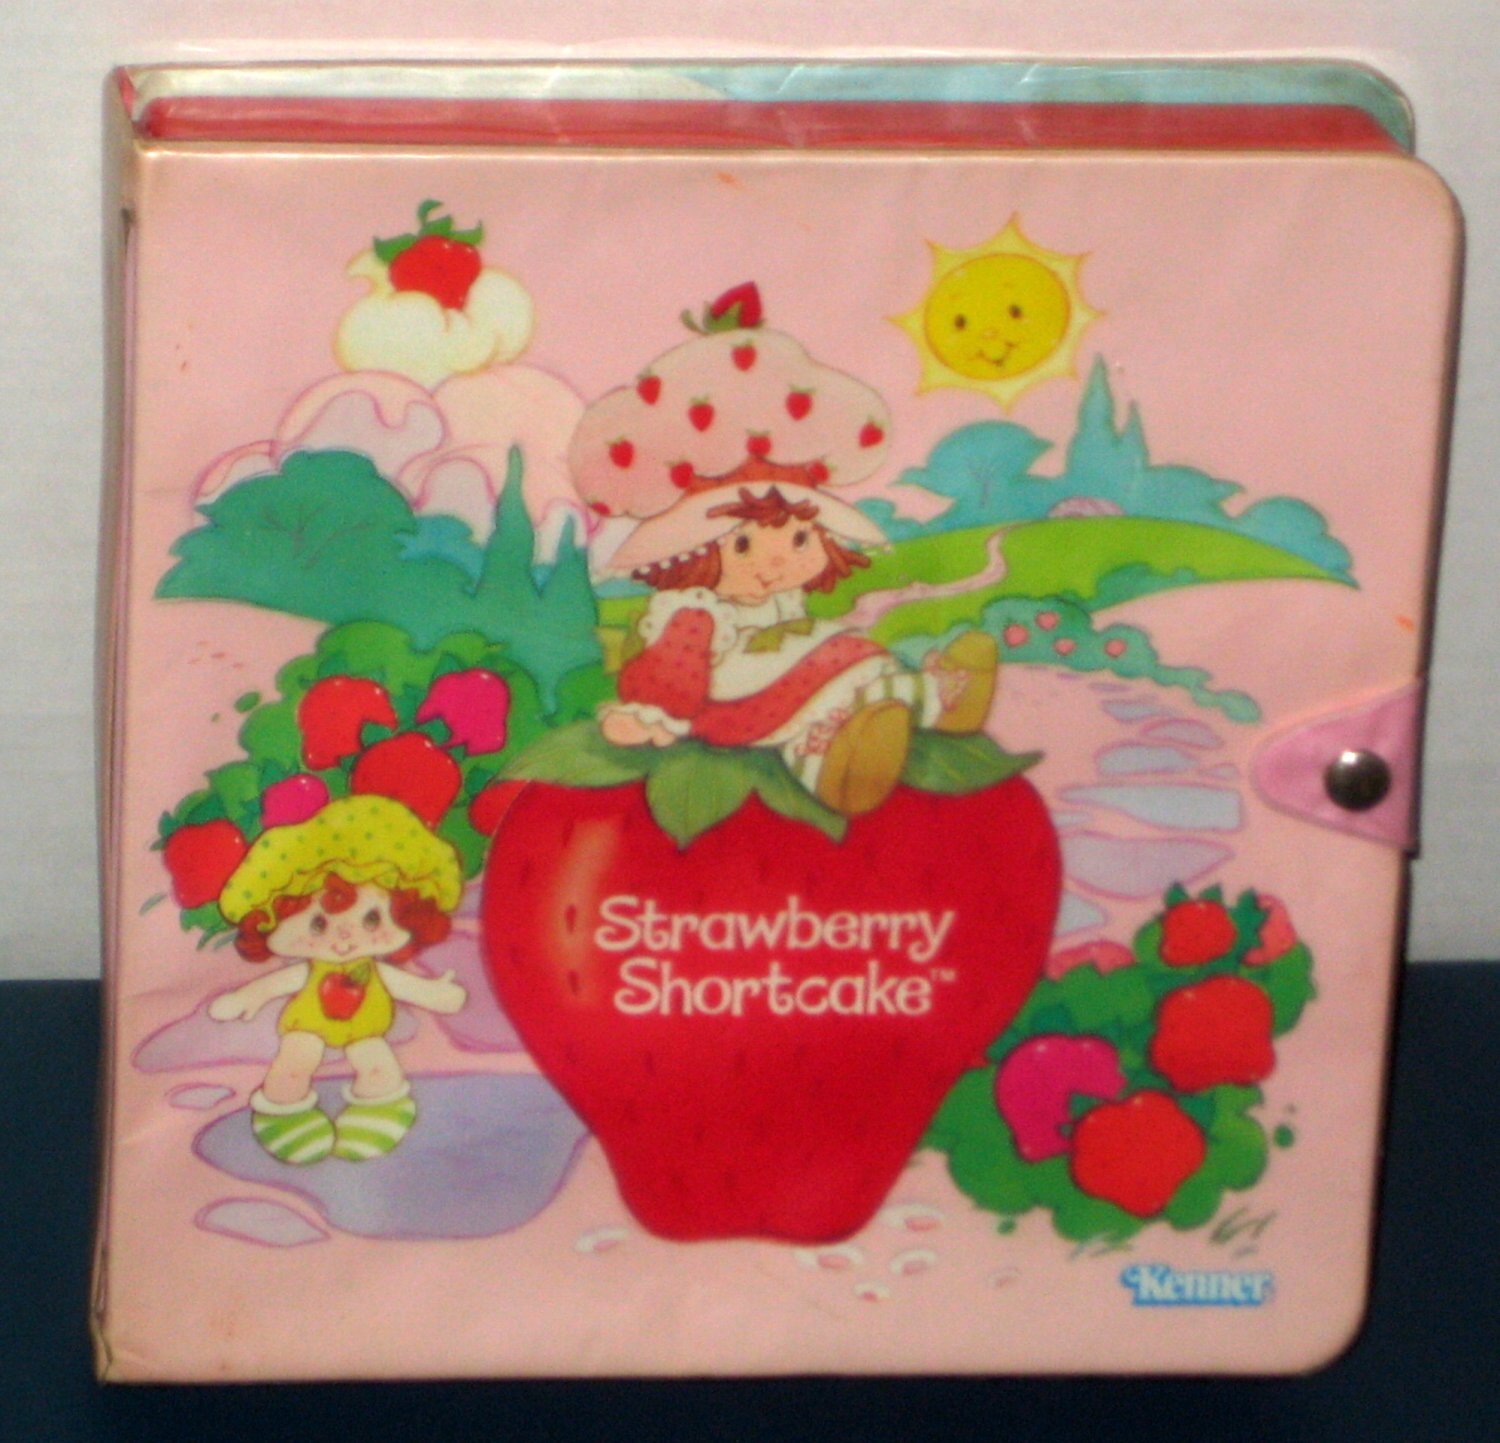 Strawberry Shortcake Lot Storage Case Anchor Hocking Fire King Bowl Frame Tray Puzzle Happy Meal Toy